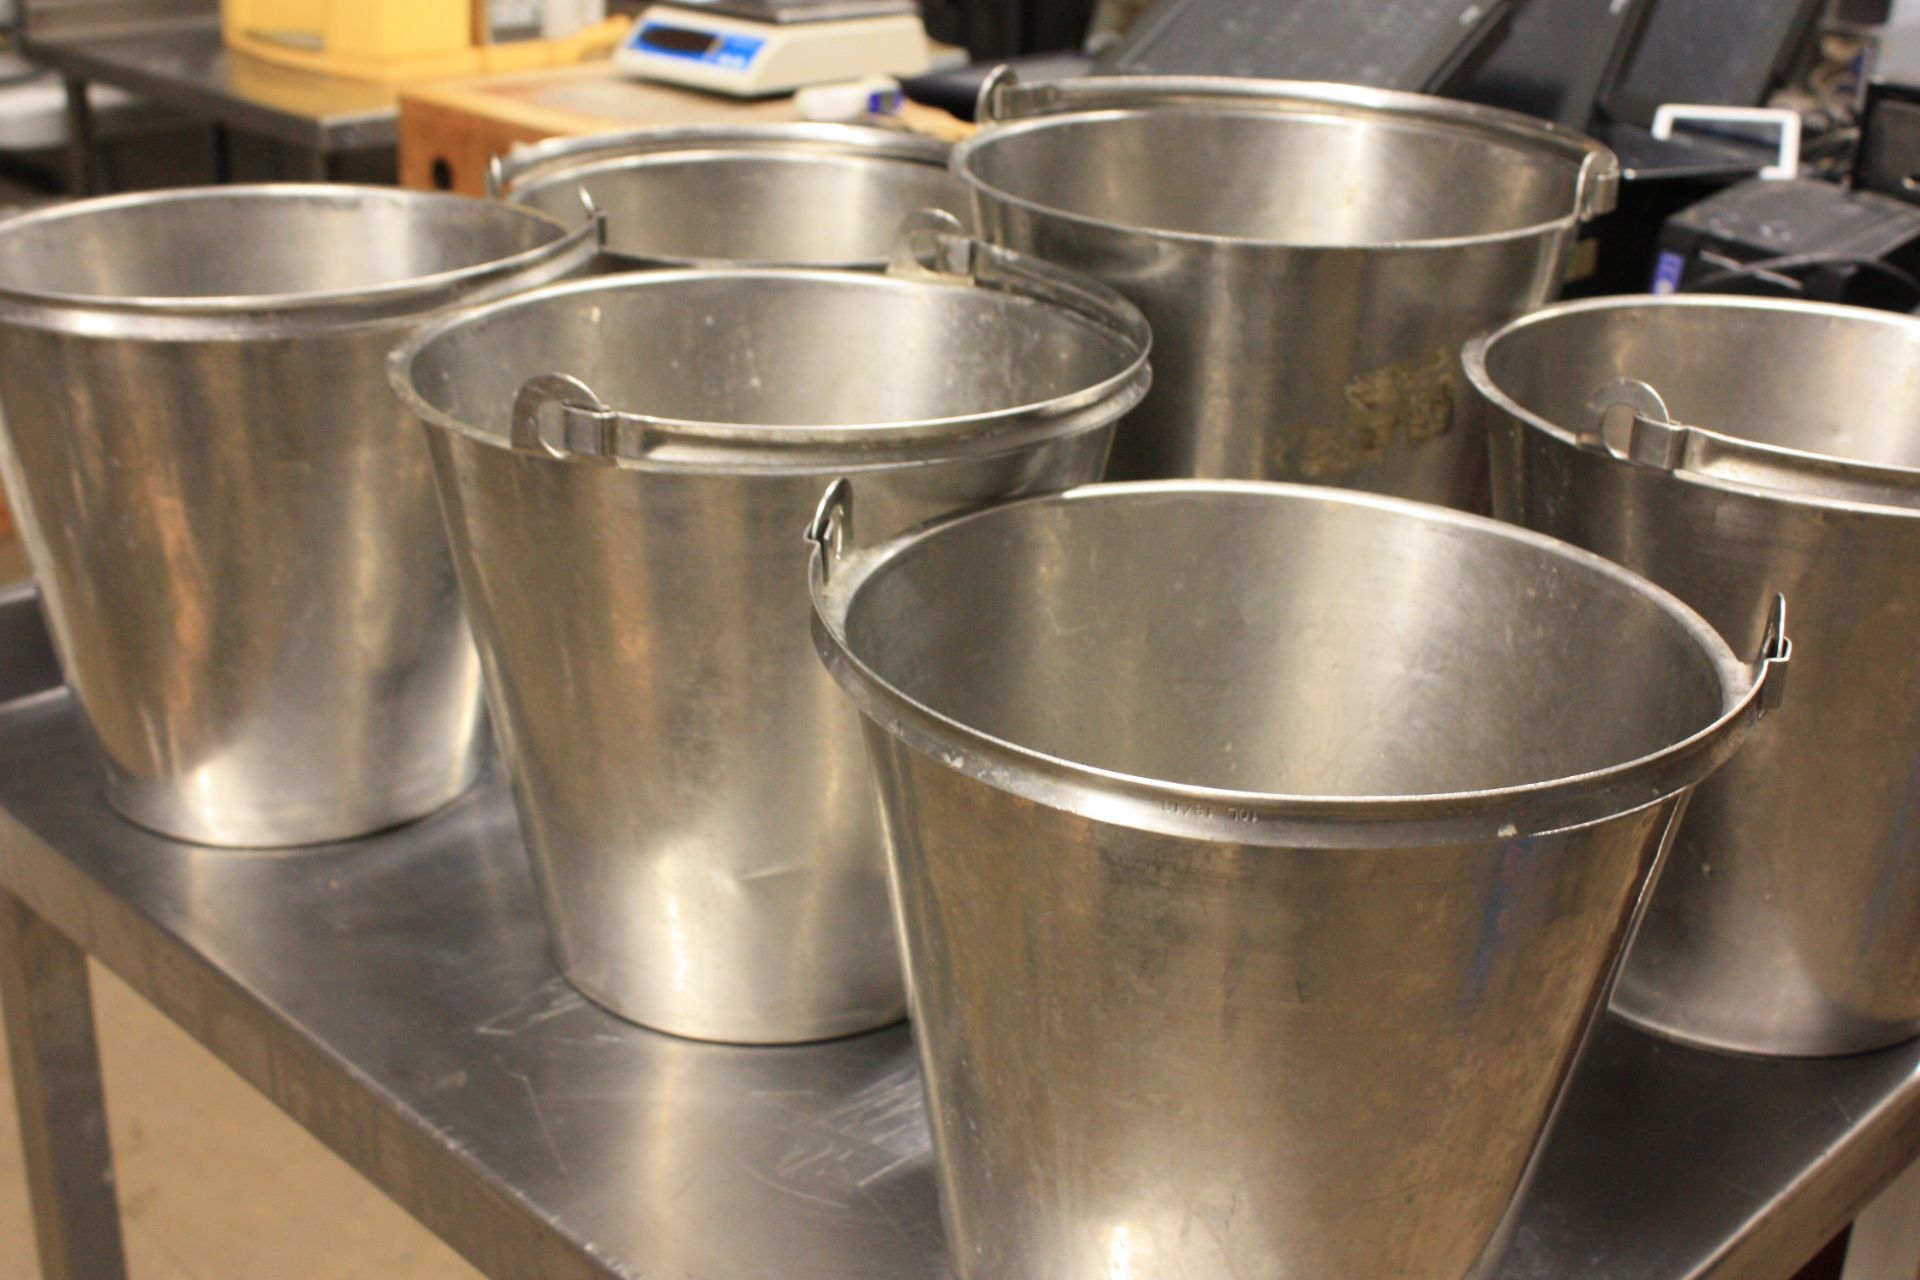 6 x Stainless steel buckets. Sizes 10L and 12L